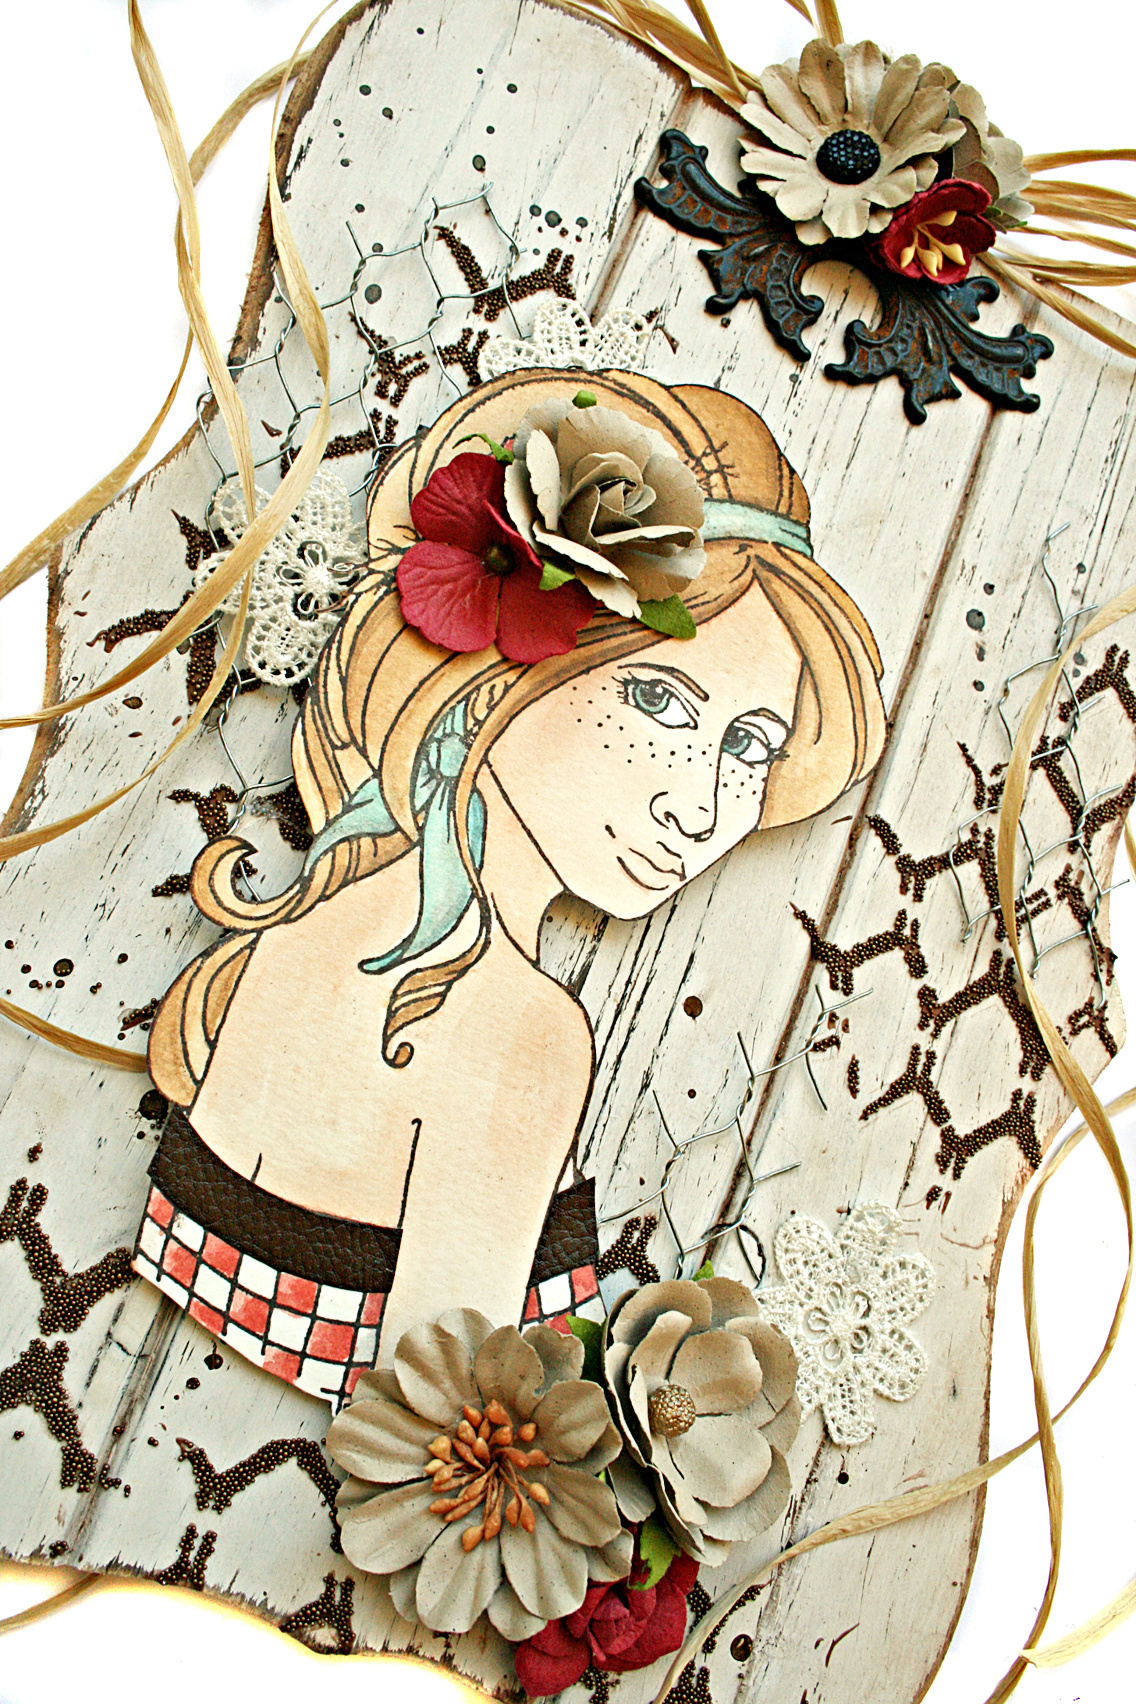 How to create a bloom girl decor piece by robbie herring!